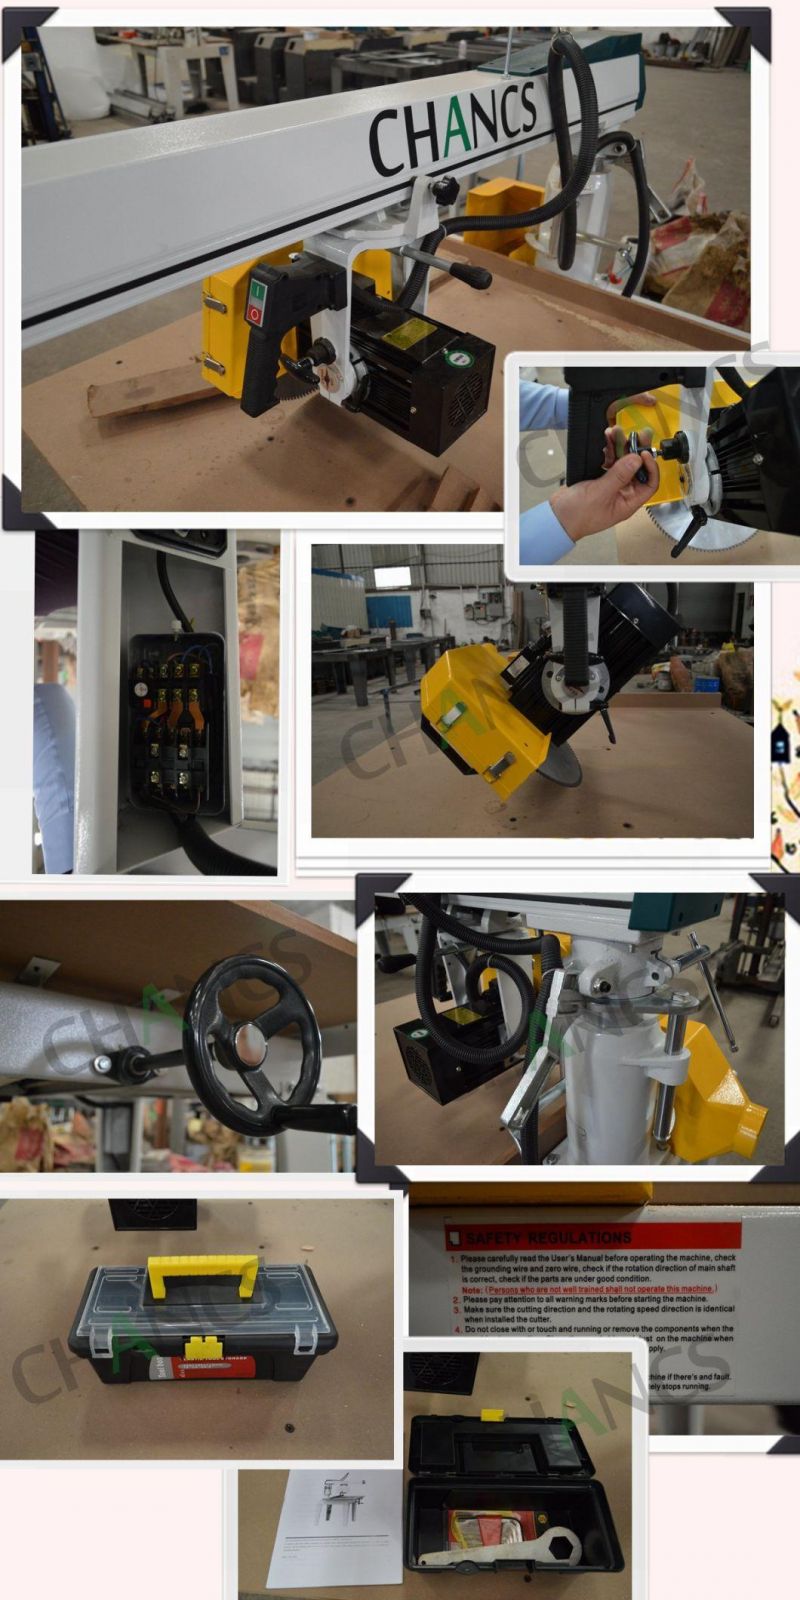 Radial Arm Saw Is Used to Cut Wood and Plastic